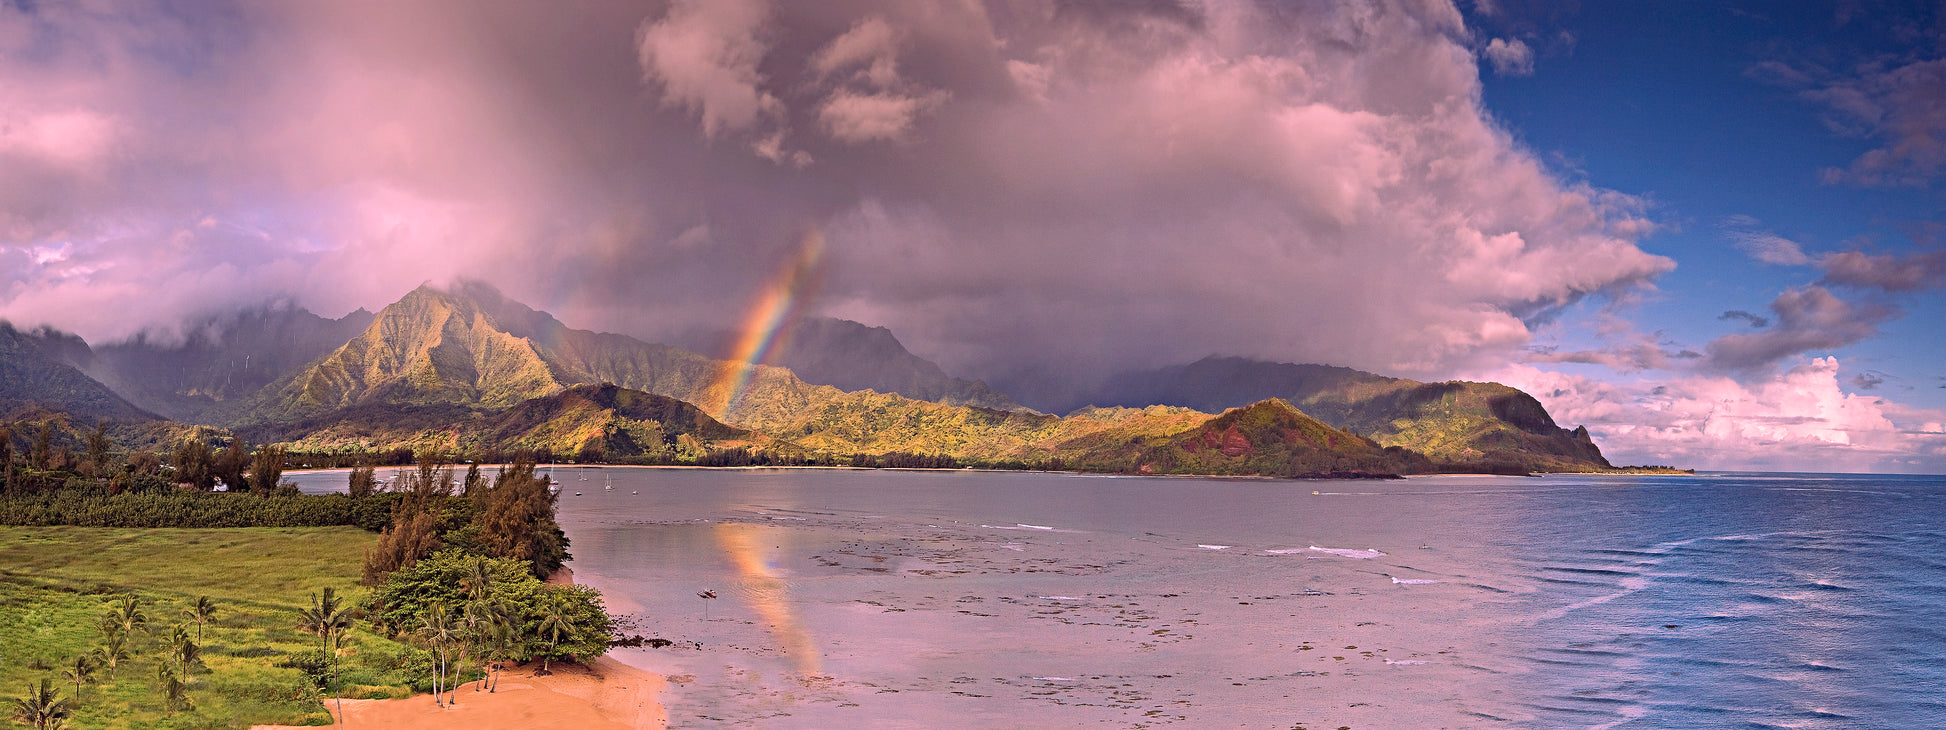 A panoramic fine art landscape photograph of Hanalei, Kauai. A rainbow embellishes the beautiful Hanalei bay and town while the sunset turns clouds a light pink. Mountains in the distance with waterfalls and a passing rain shower make this image unique. Landscape photography by Inspiring Images Hawaii. 